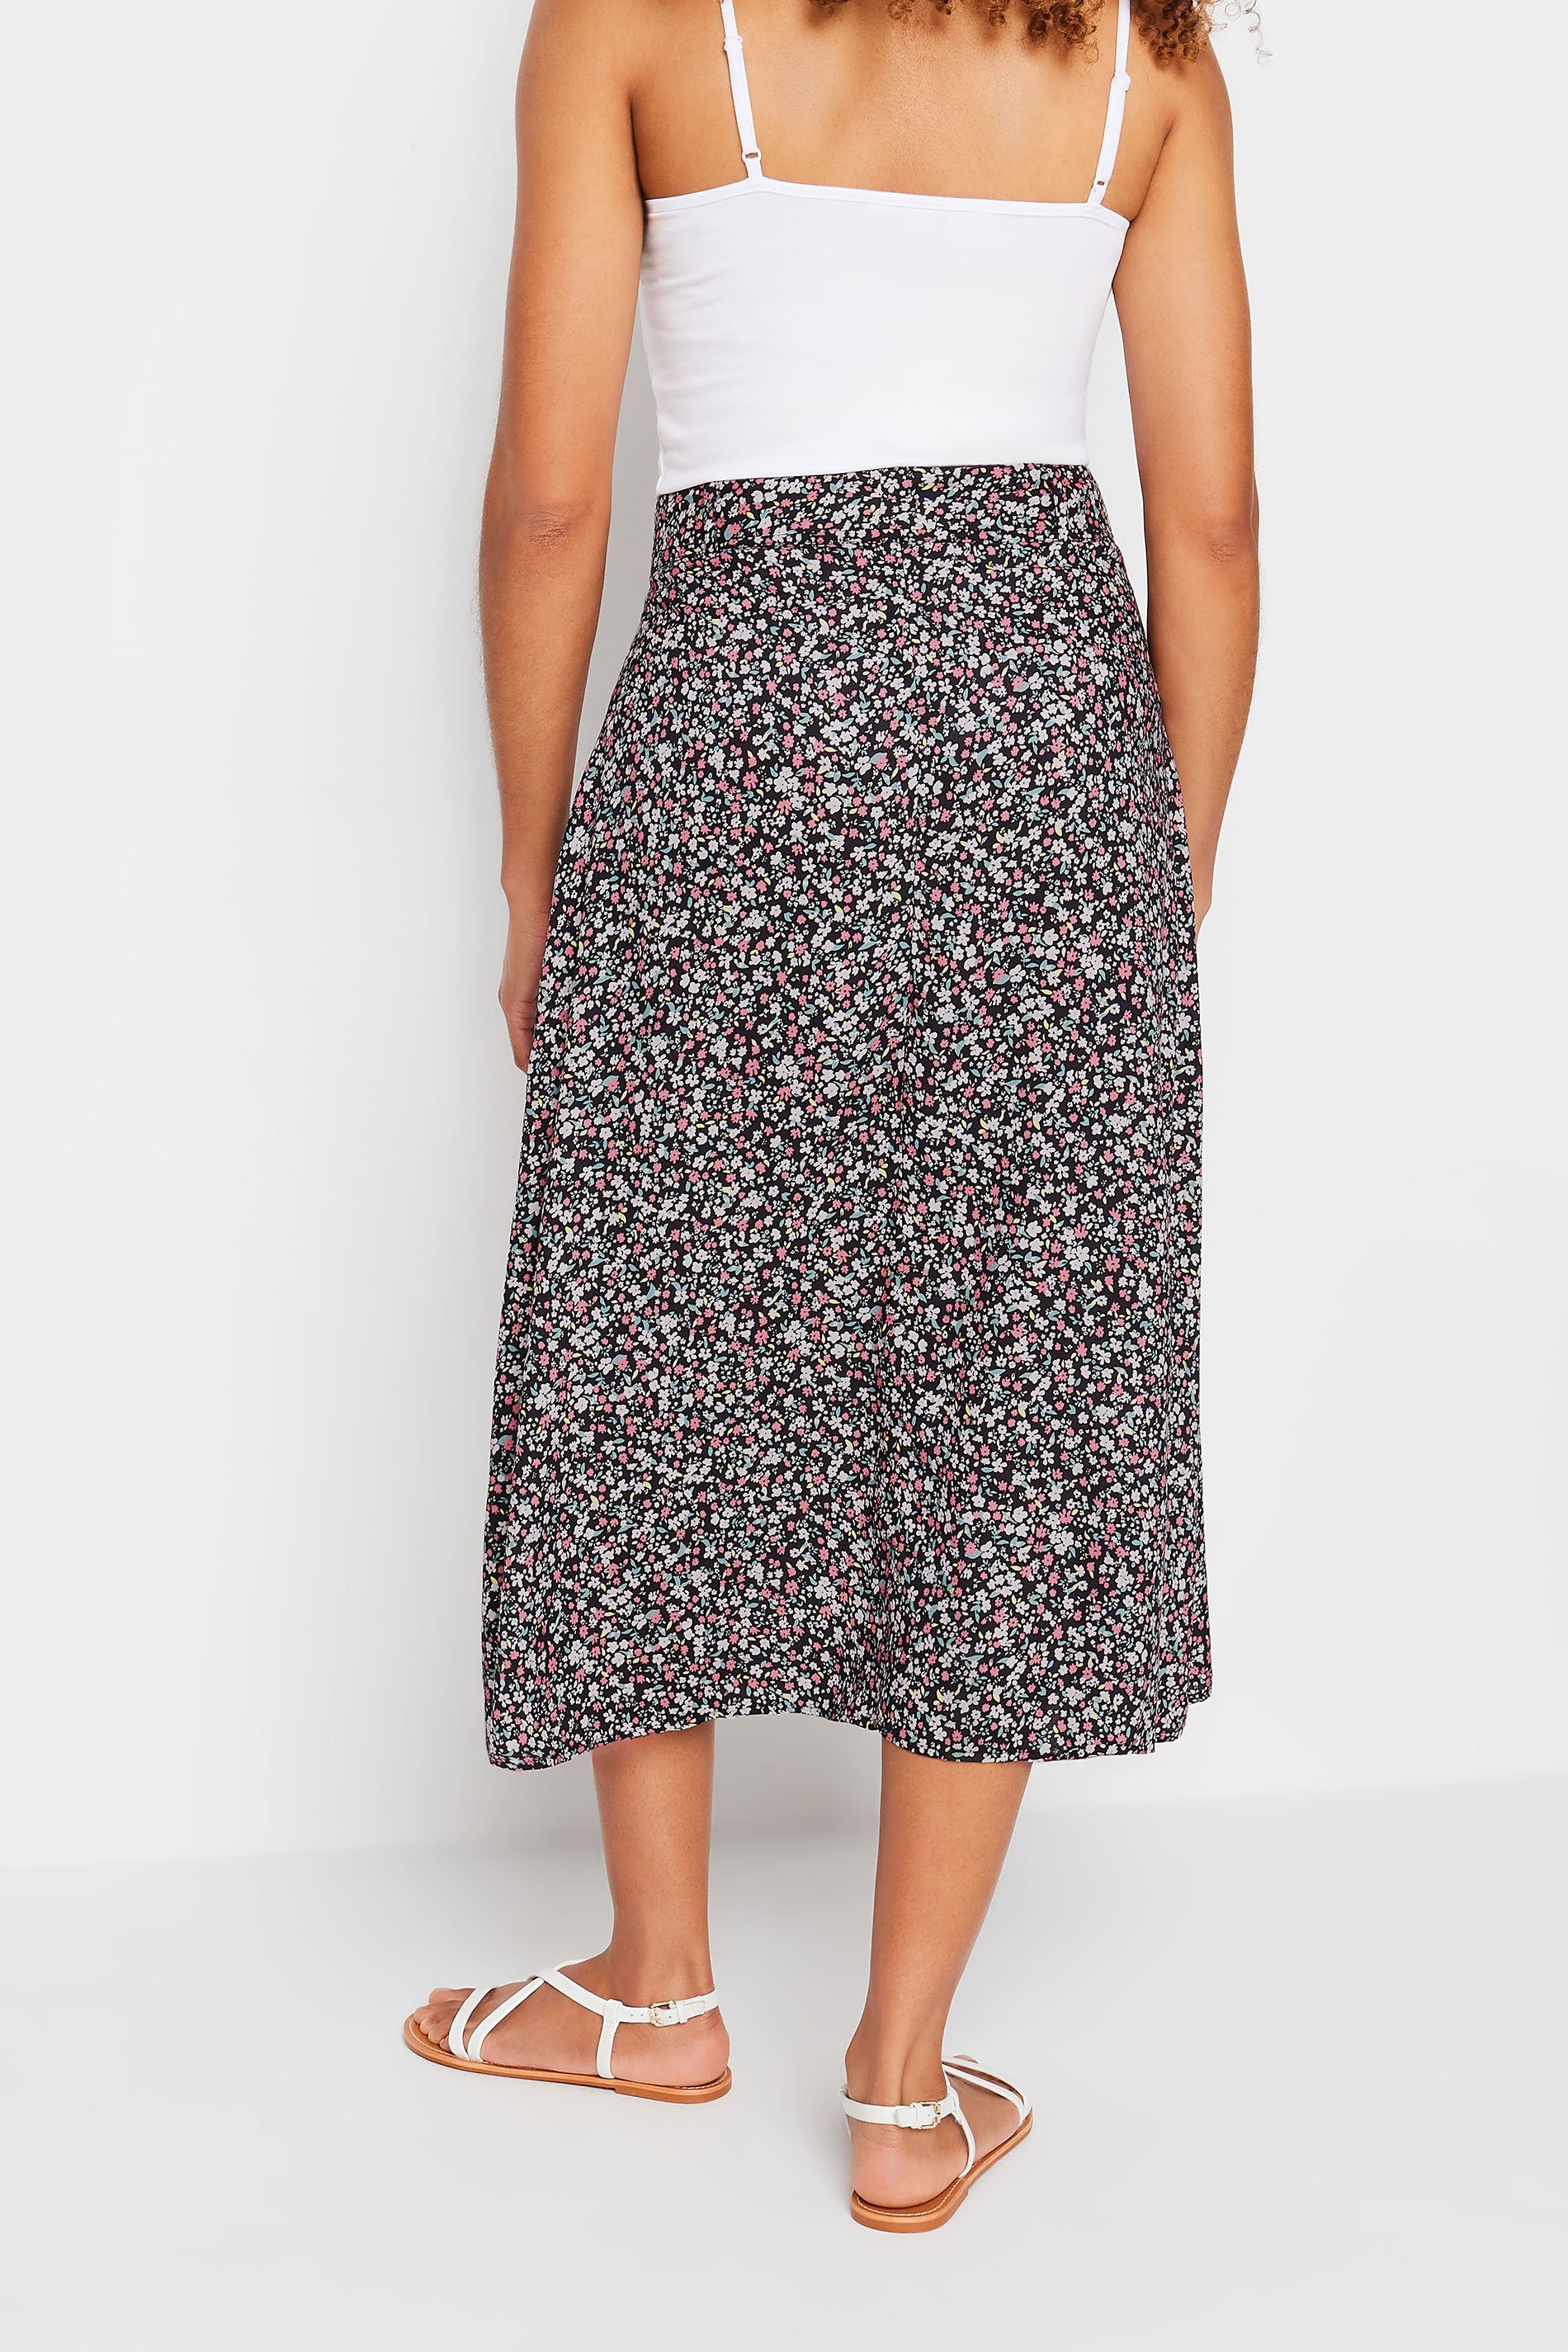 M&Co Black Ditsy Floral Print Belted Midi Skirt | M&Co 3